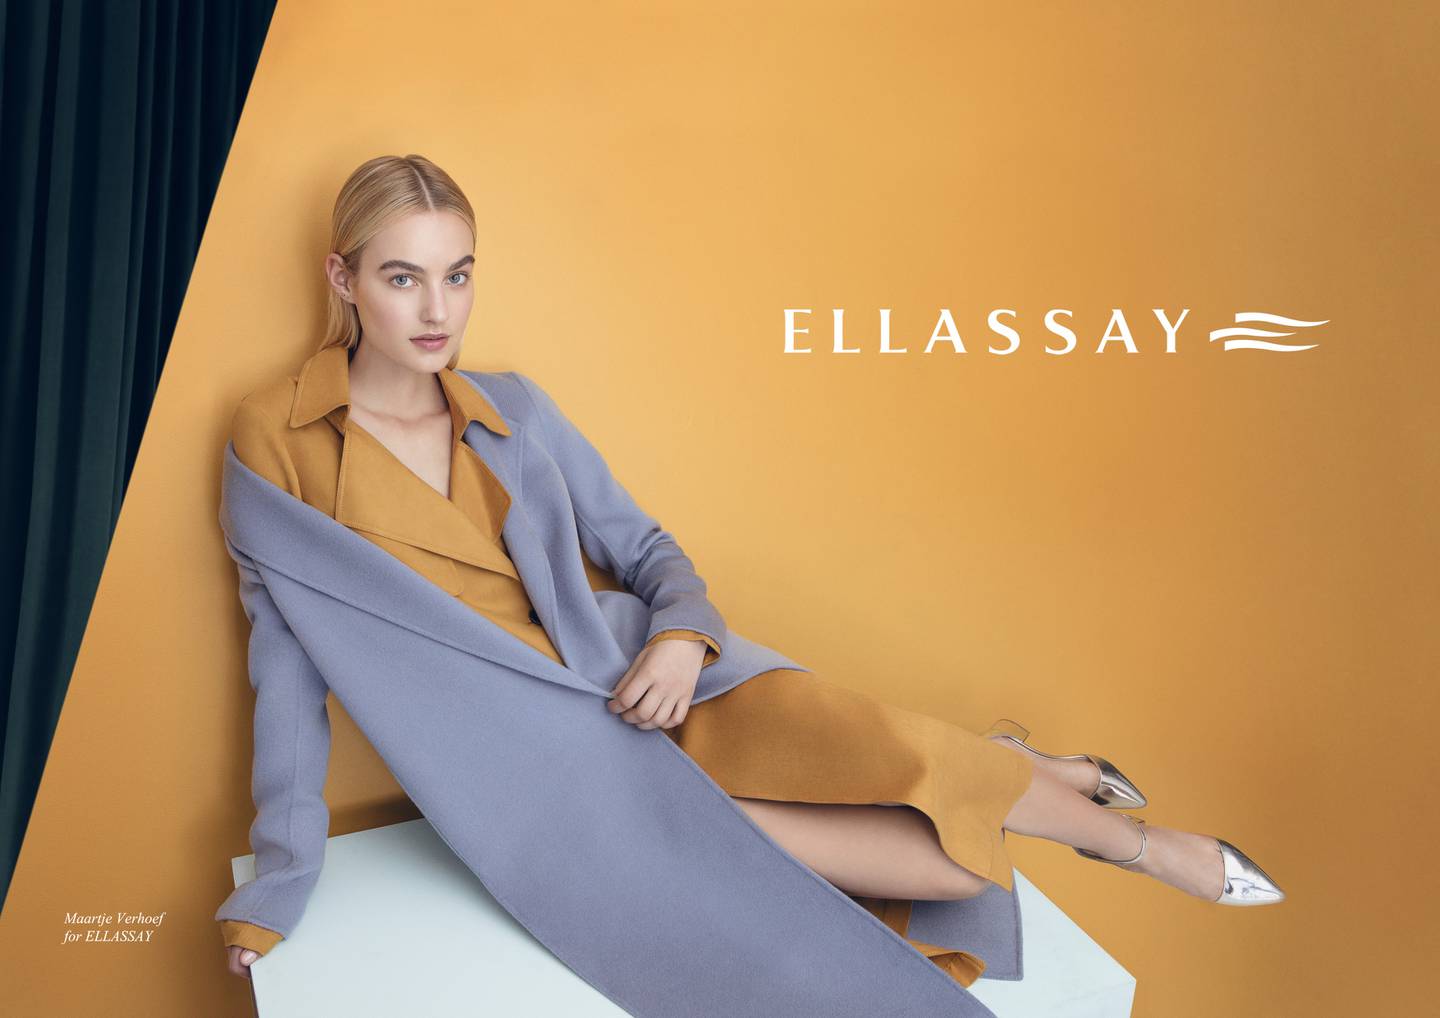 A campaign image for the Ellassay brand in China. Ellassay Group